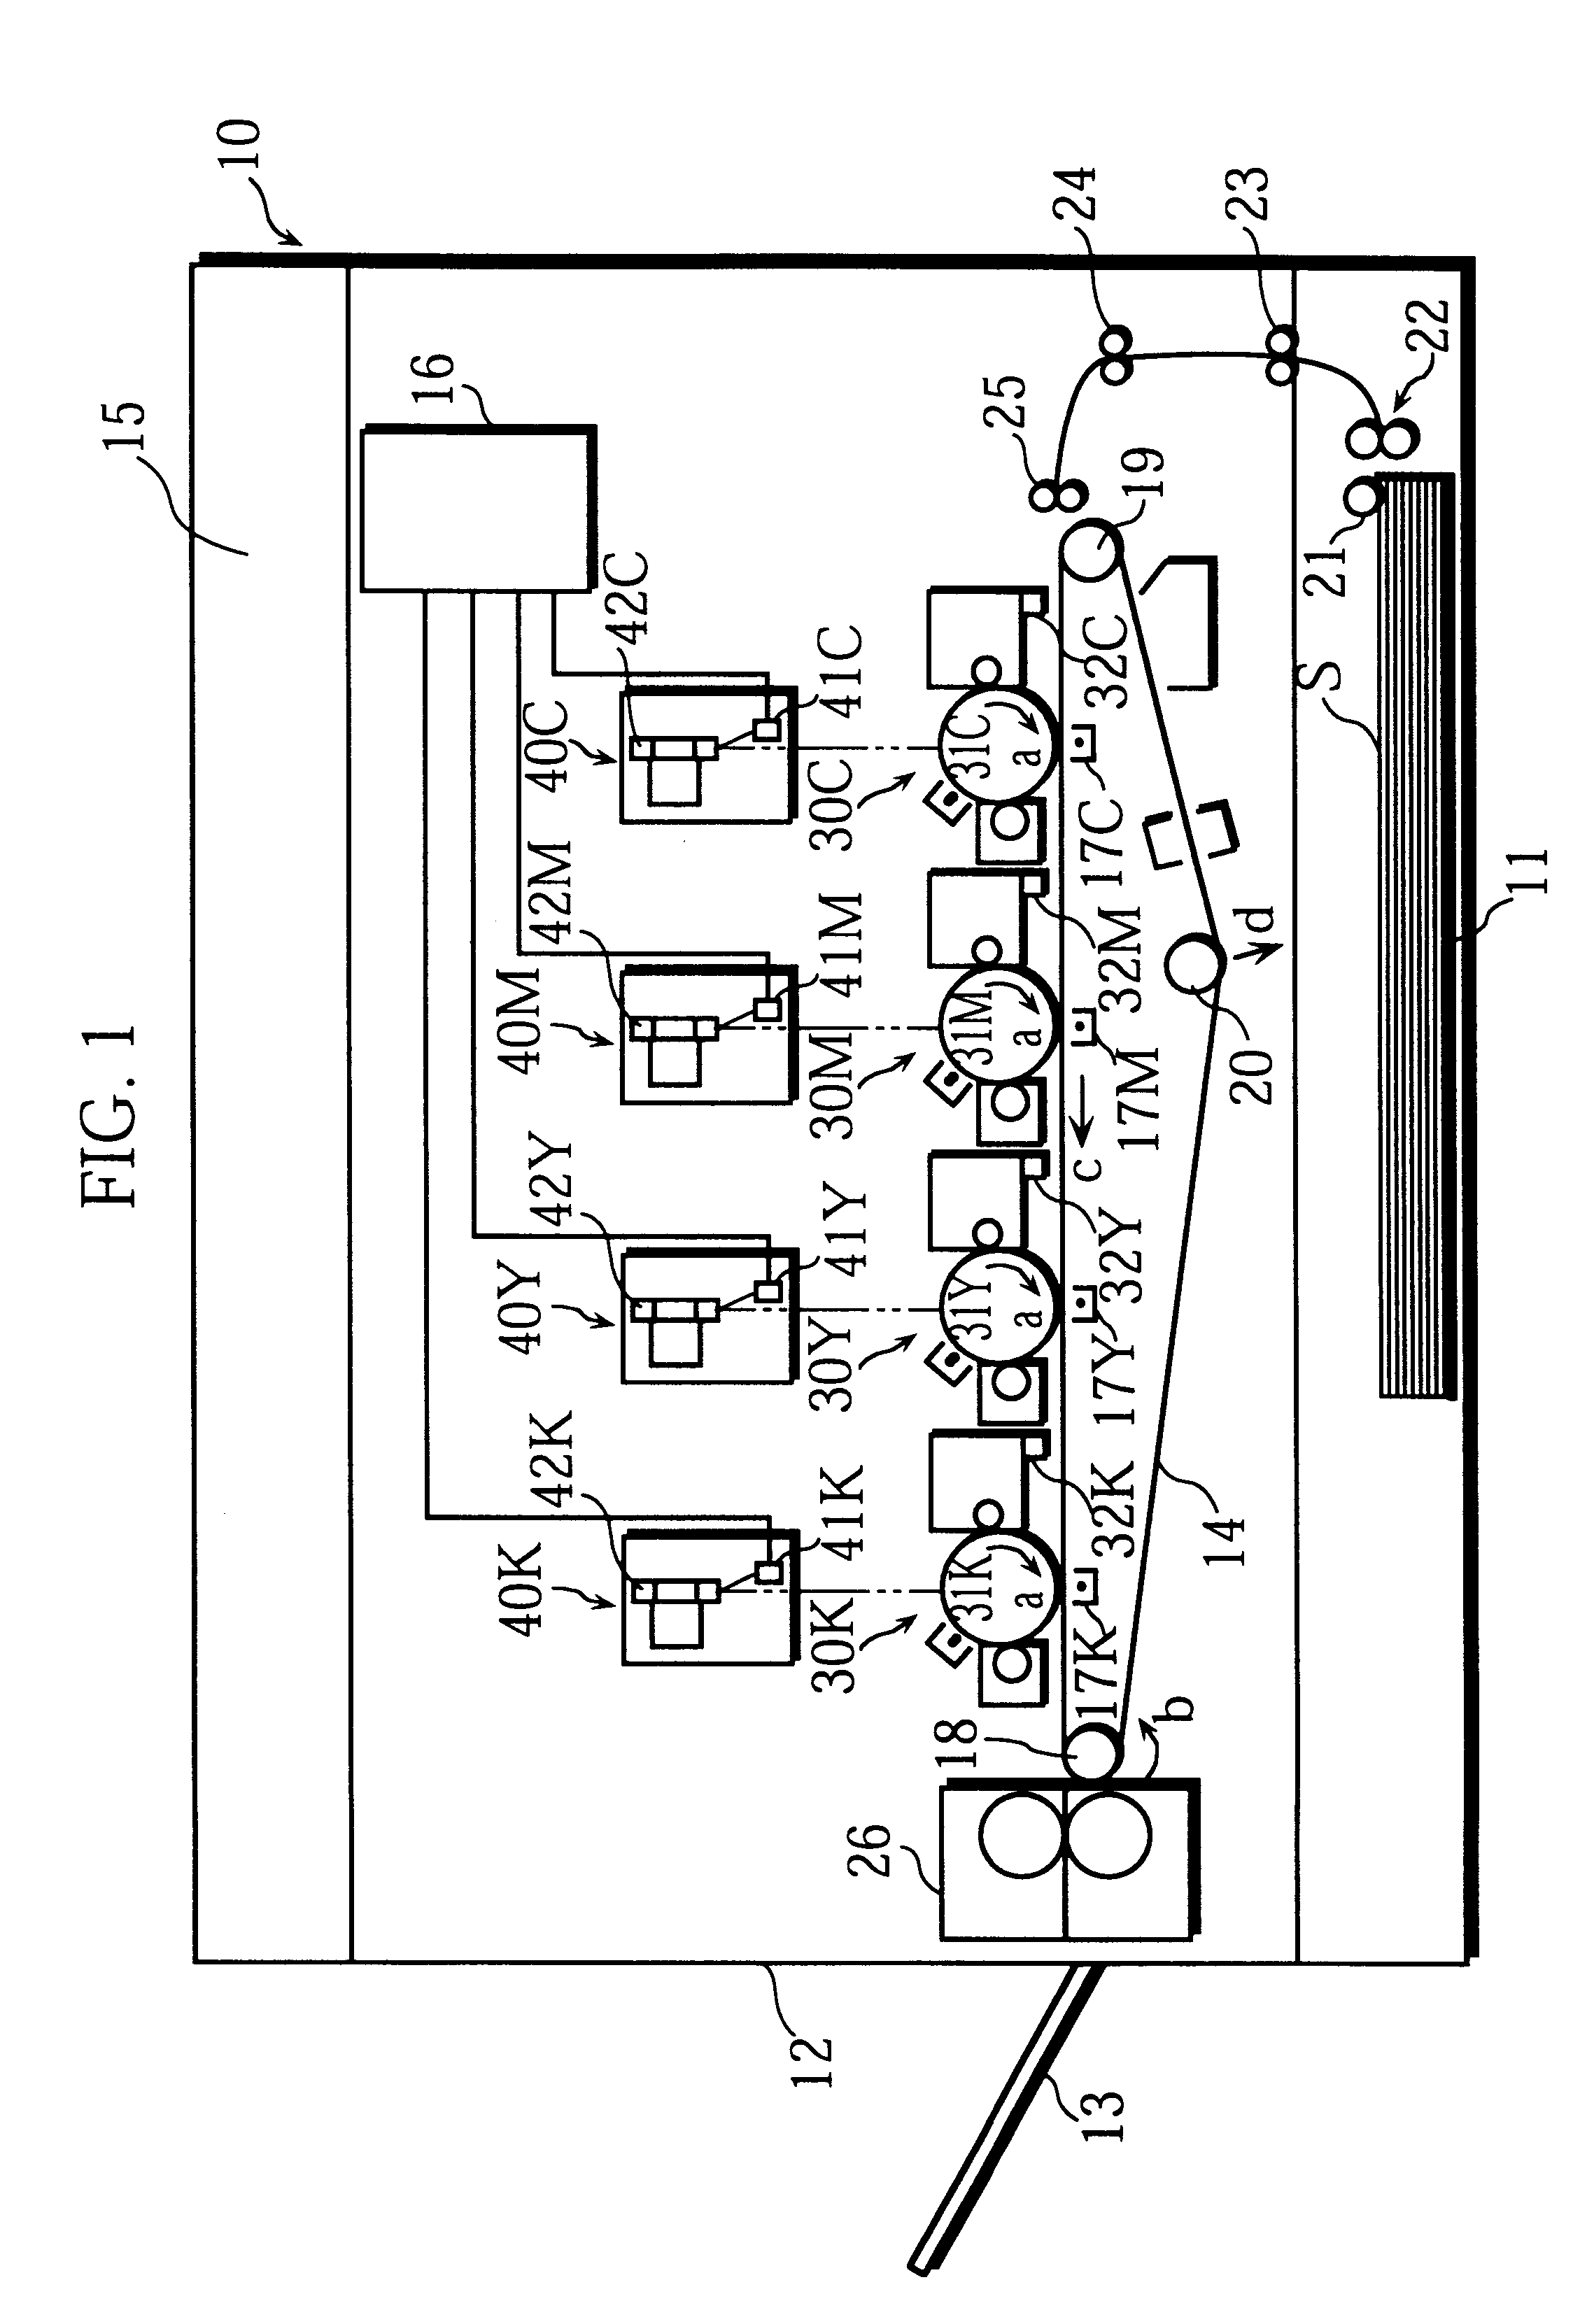 Image forming apparatus having photosensitive drum driven by stepping motor